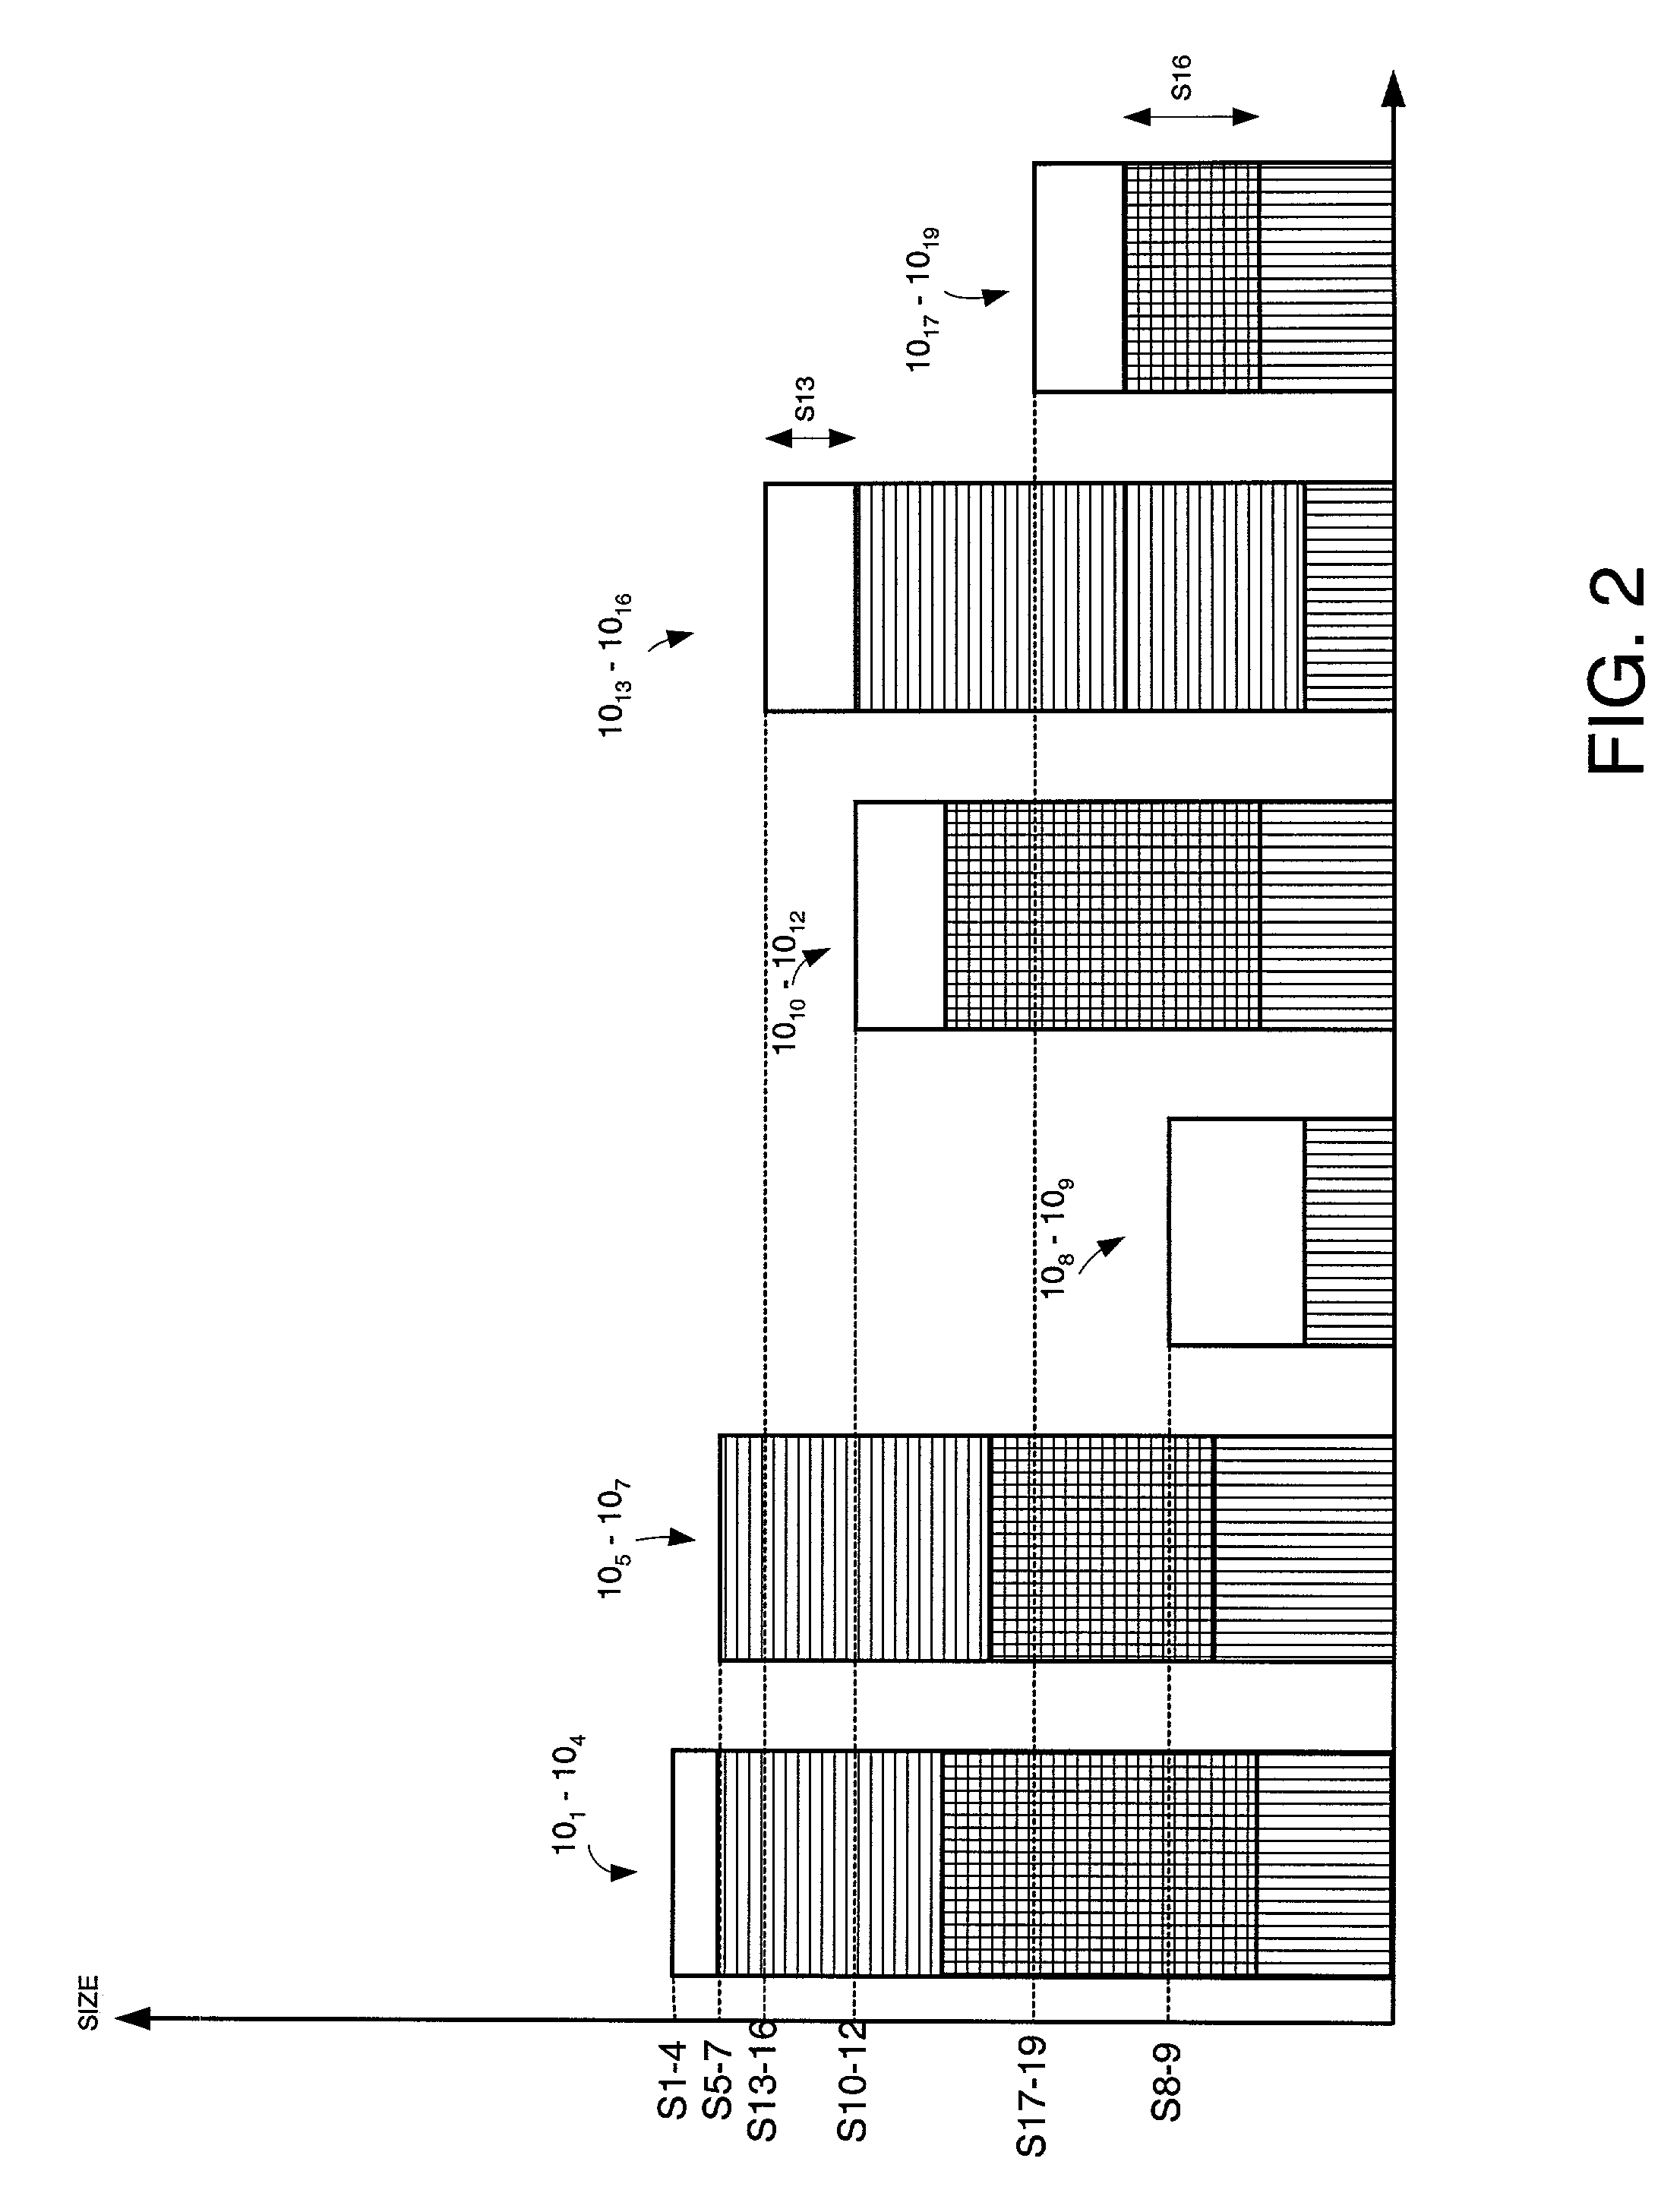 Method and system for scheduling a transmission of compressible and non-compressible packets